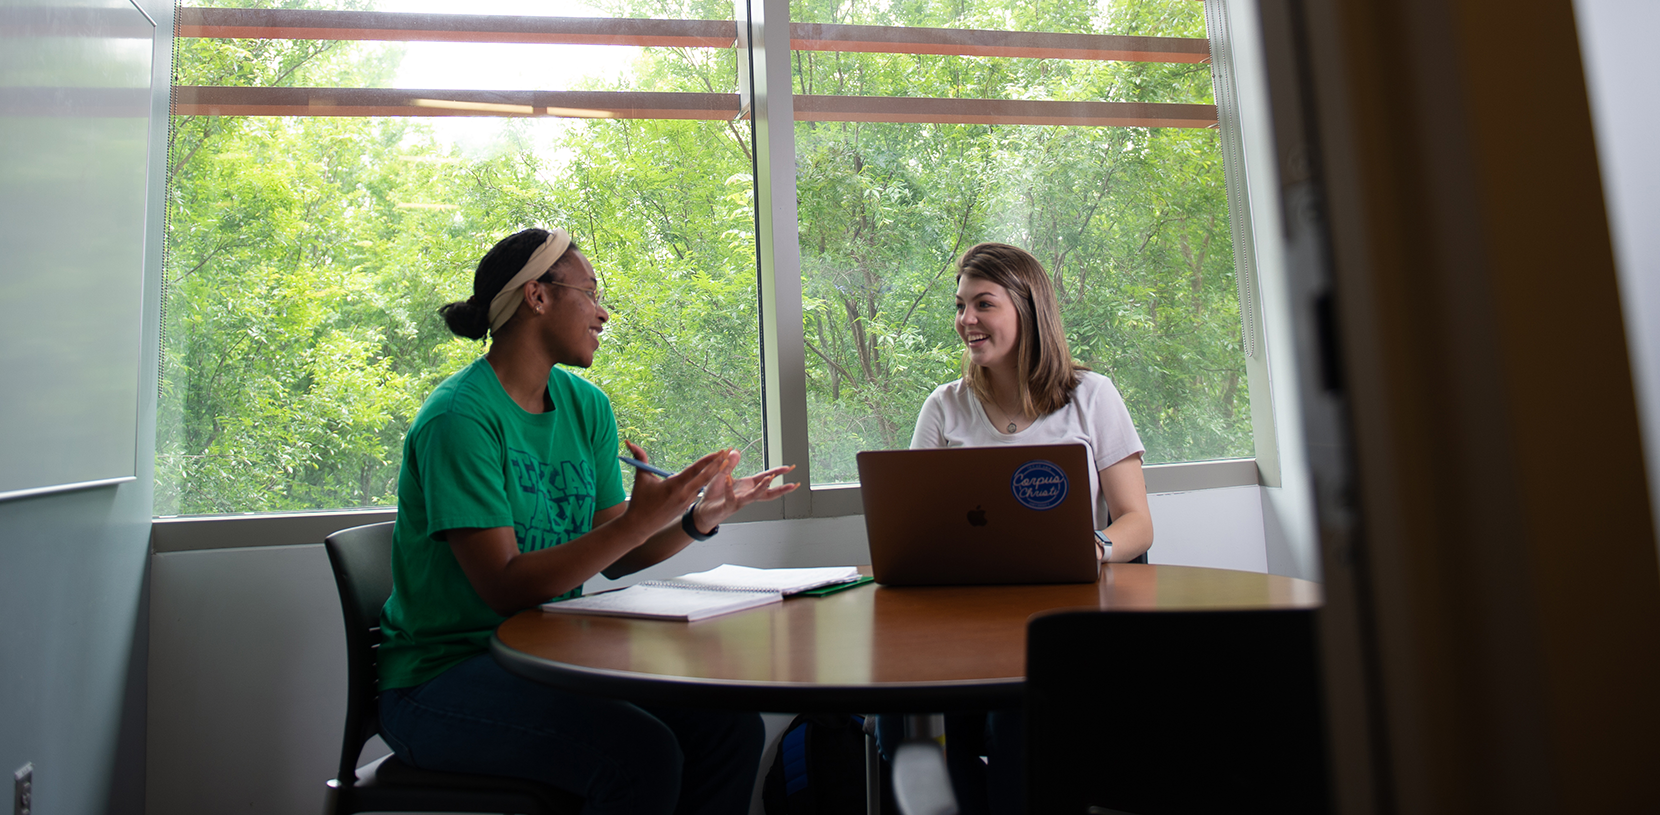 students sitting by a window and talking